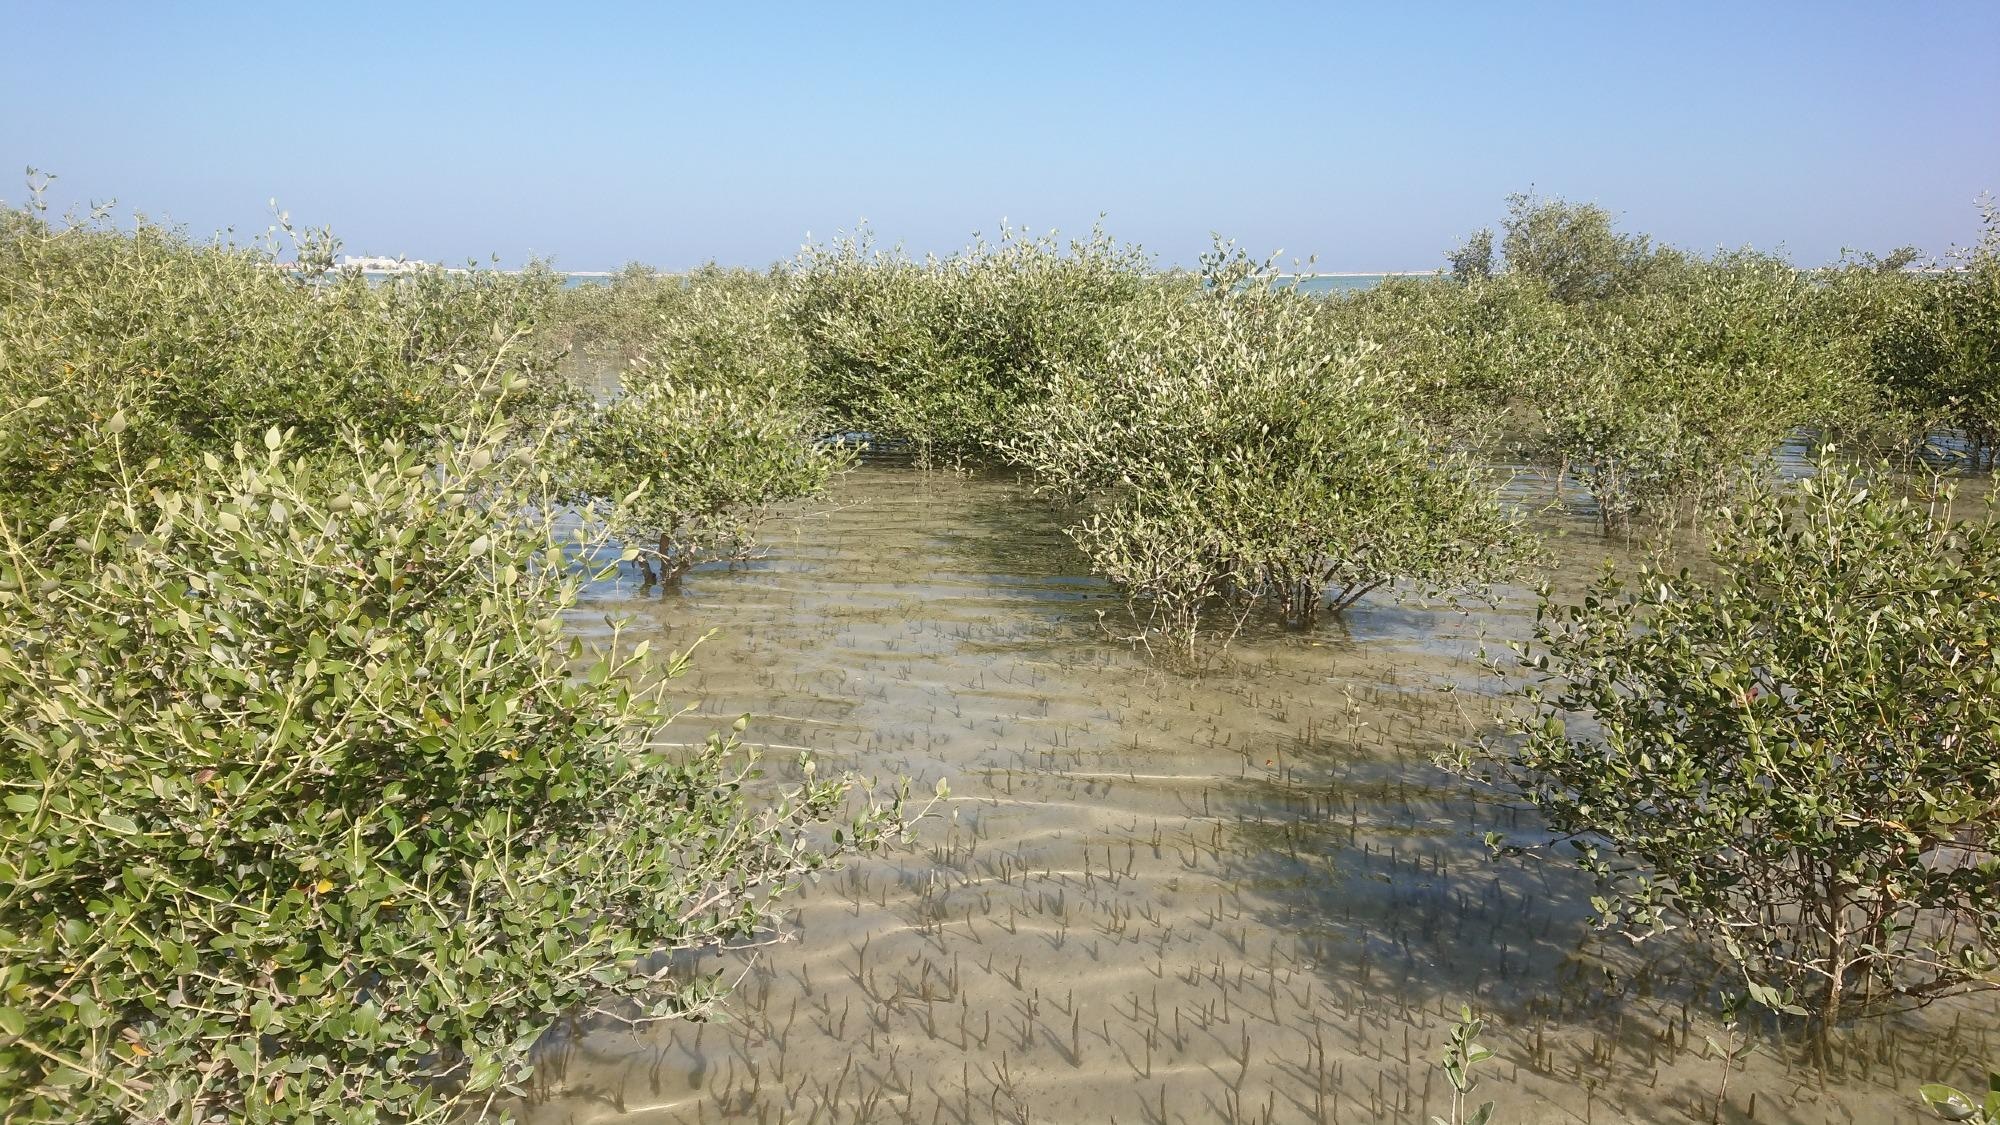 Study Shows Climate Change Accounts for Disappearance of Mangroves in Oman